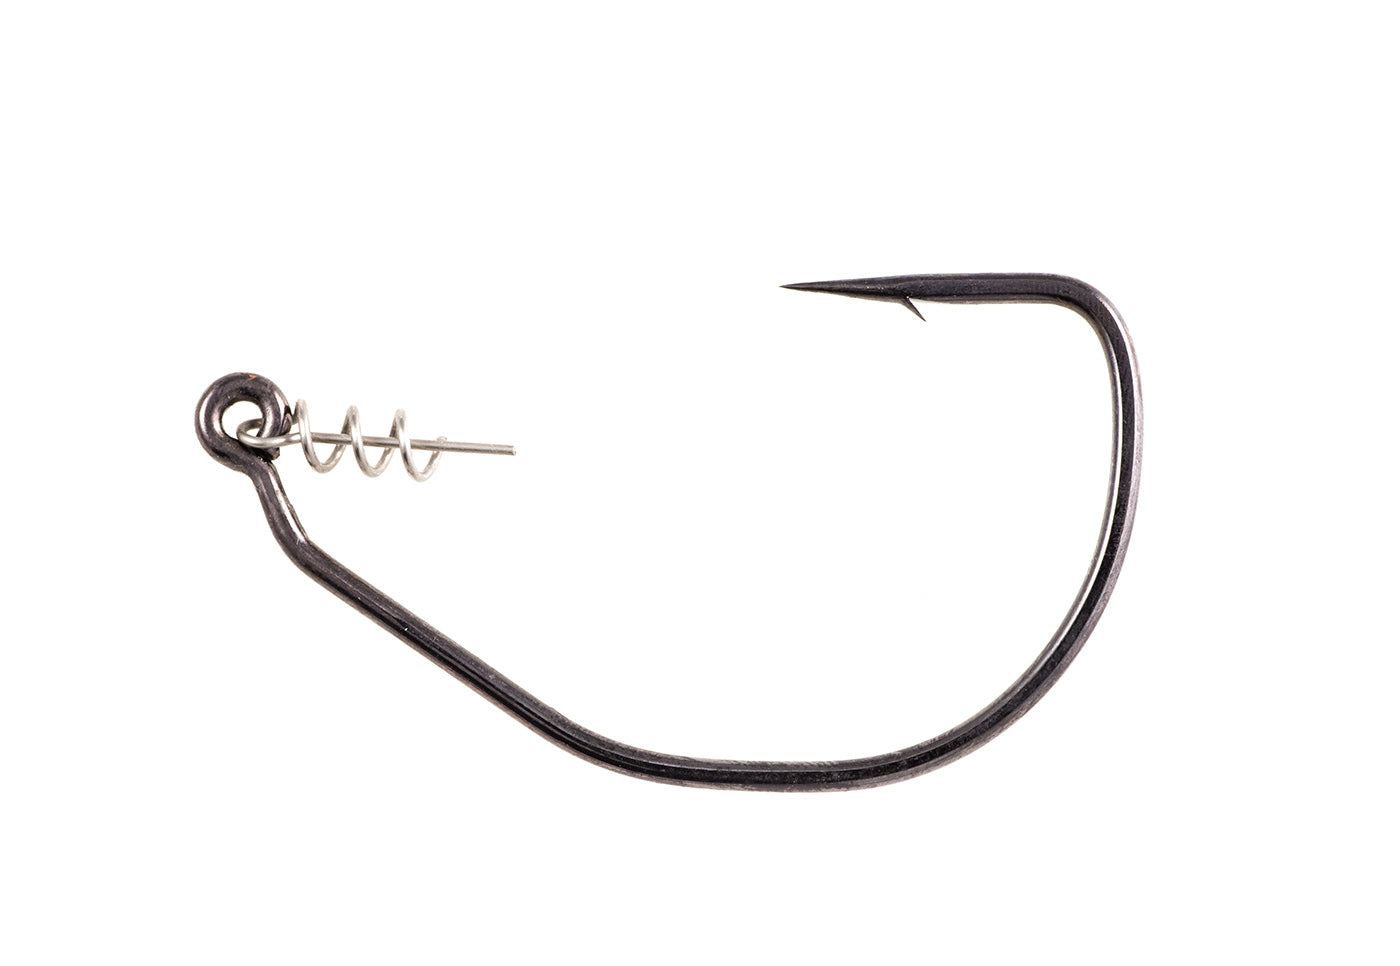 Buy Owner Long Shank Hooks Online At Inexpensive Pricing - Melton Tackle